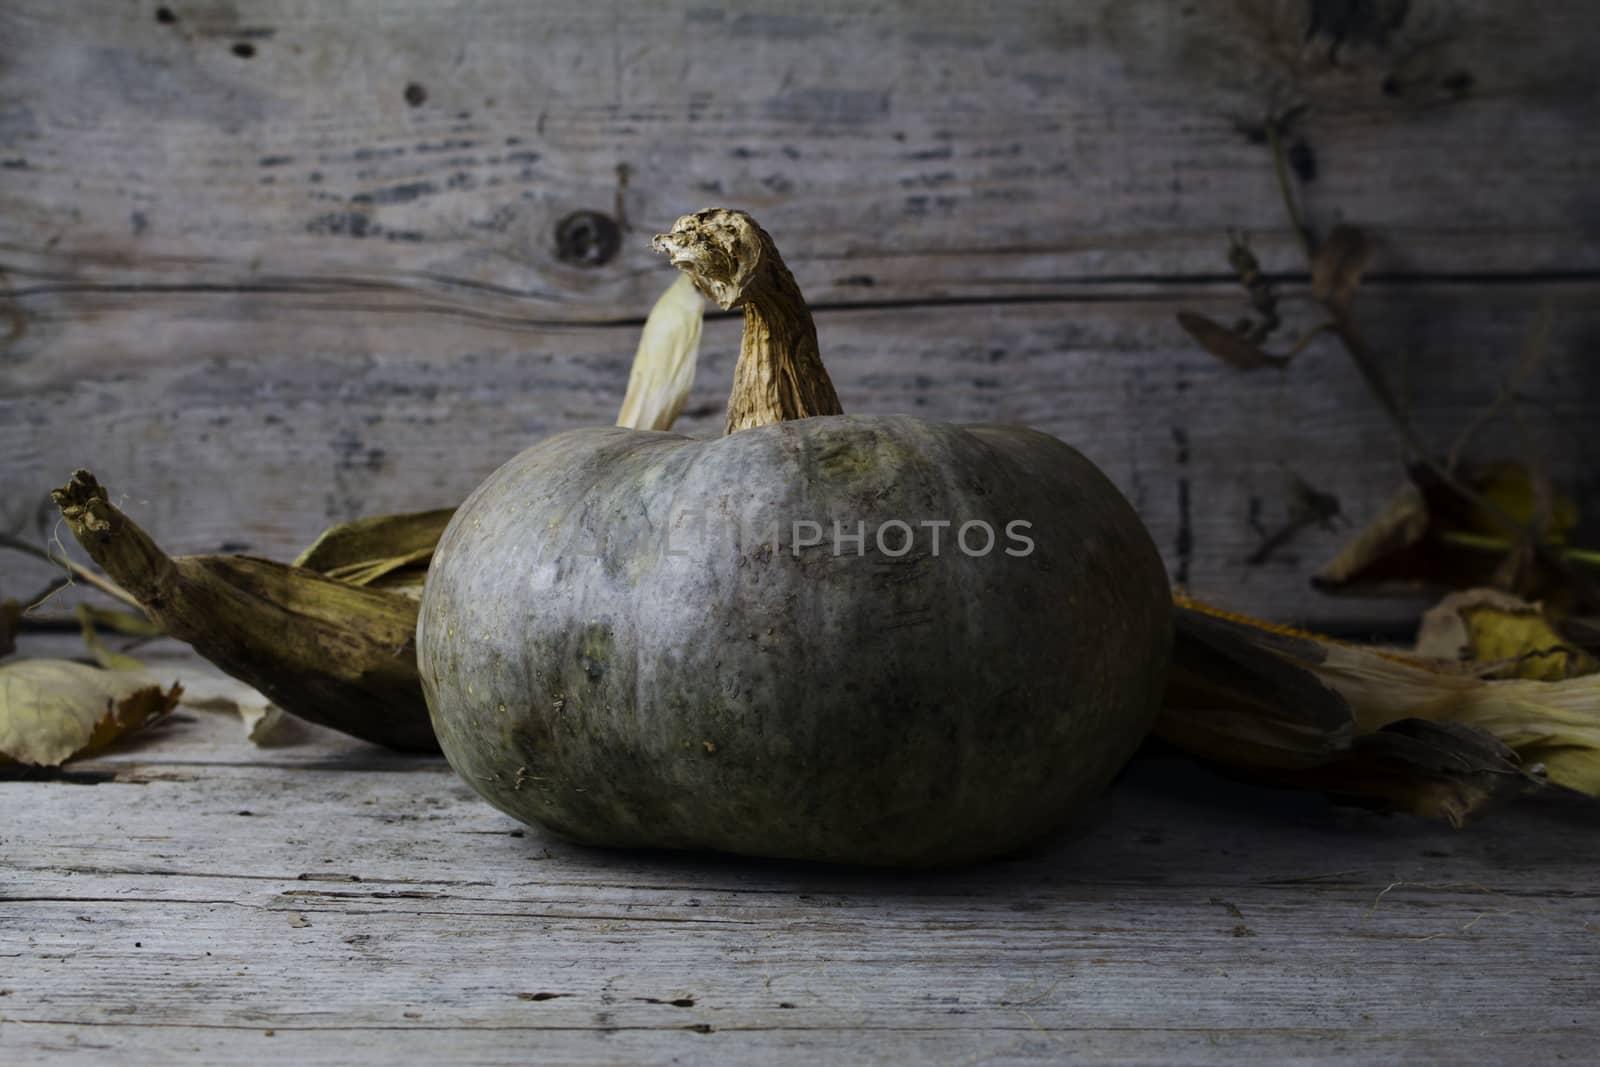 Pumpkins, Corncob and autumn leaves Decoration on a wooden table by alexandarilich